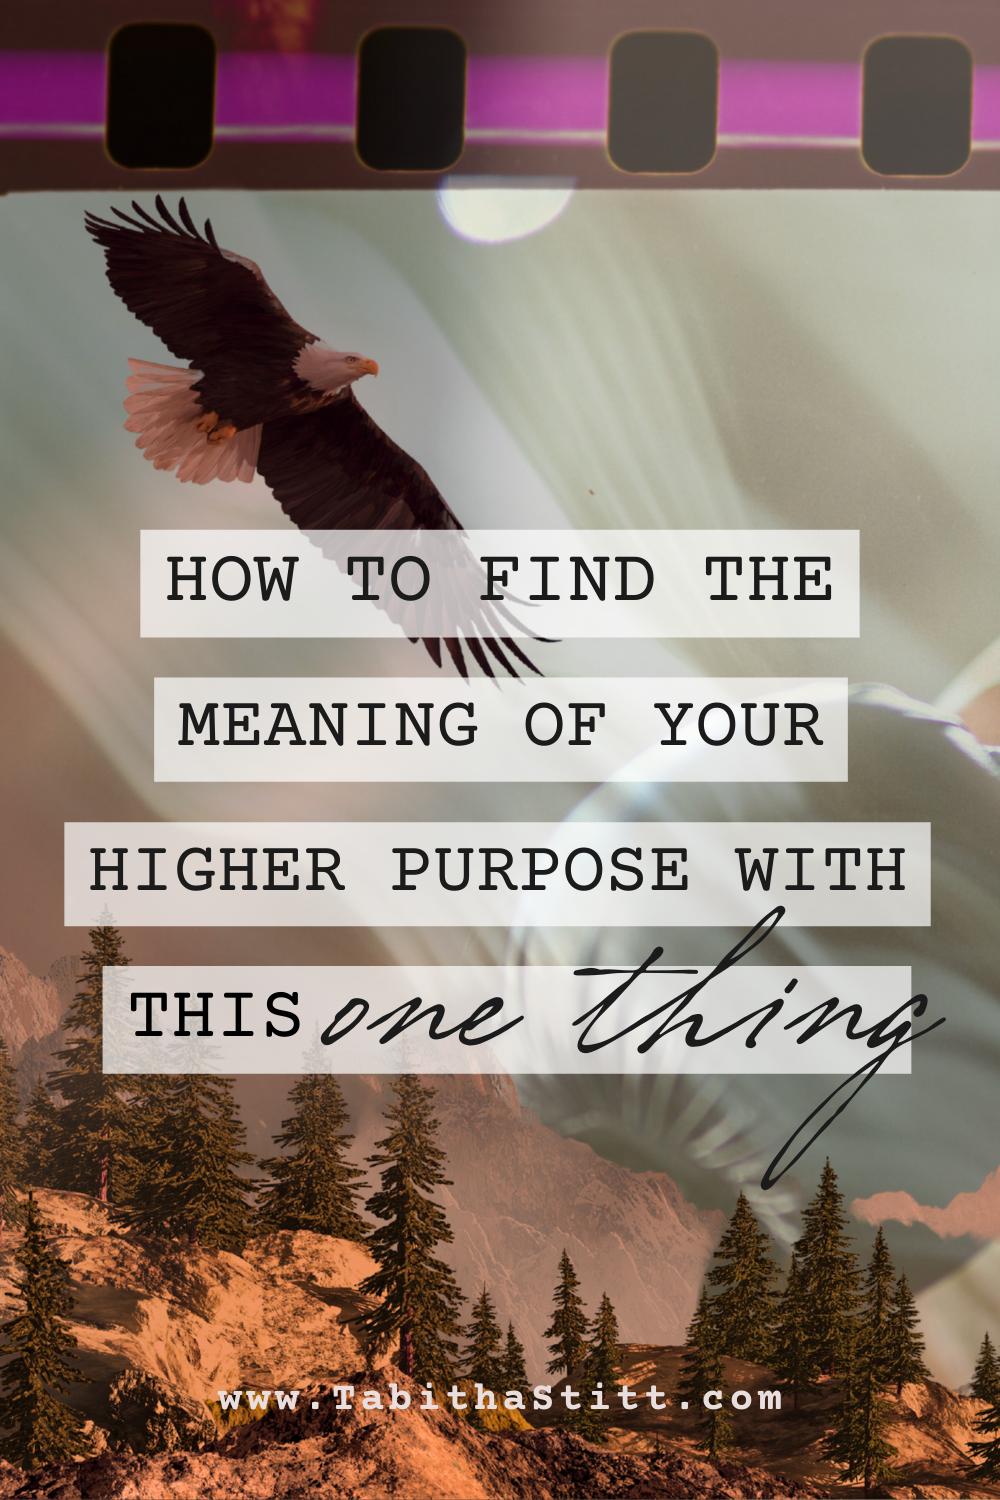 How to Find the Meaning of Your Higher Purpose with This One Thing on The Podcast, The Self-Help Psychic with Tabitha Stitt showing an Eagle for Leadership and a True Inspired and Soaring Mission